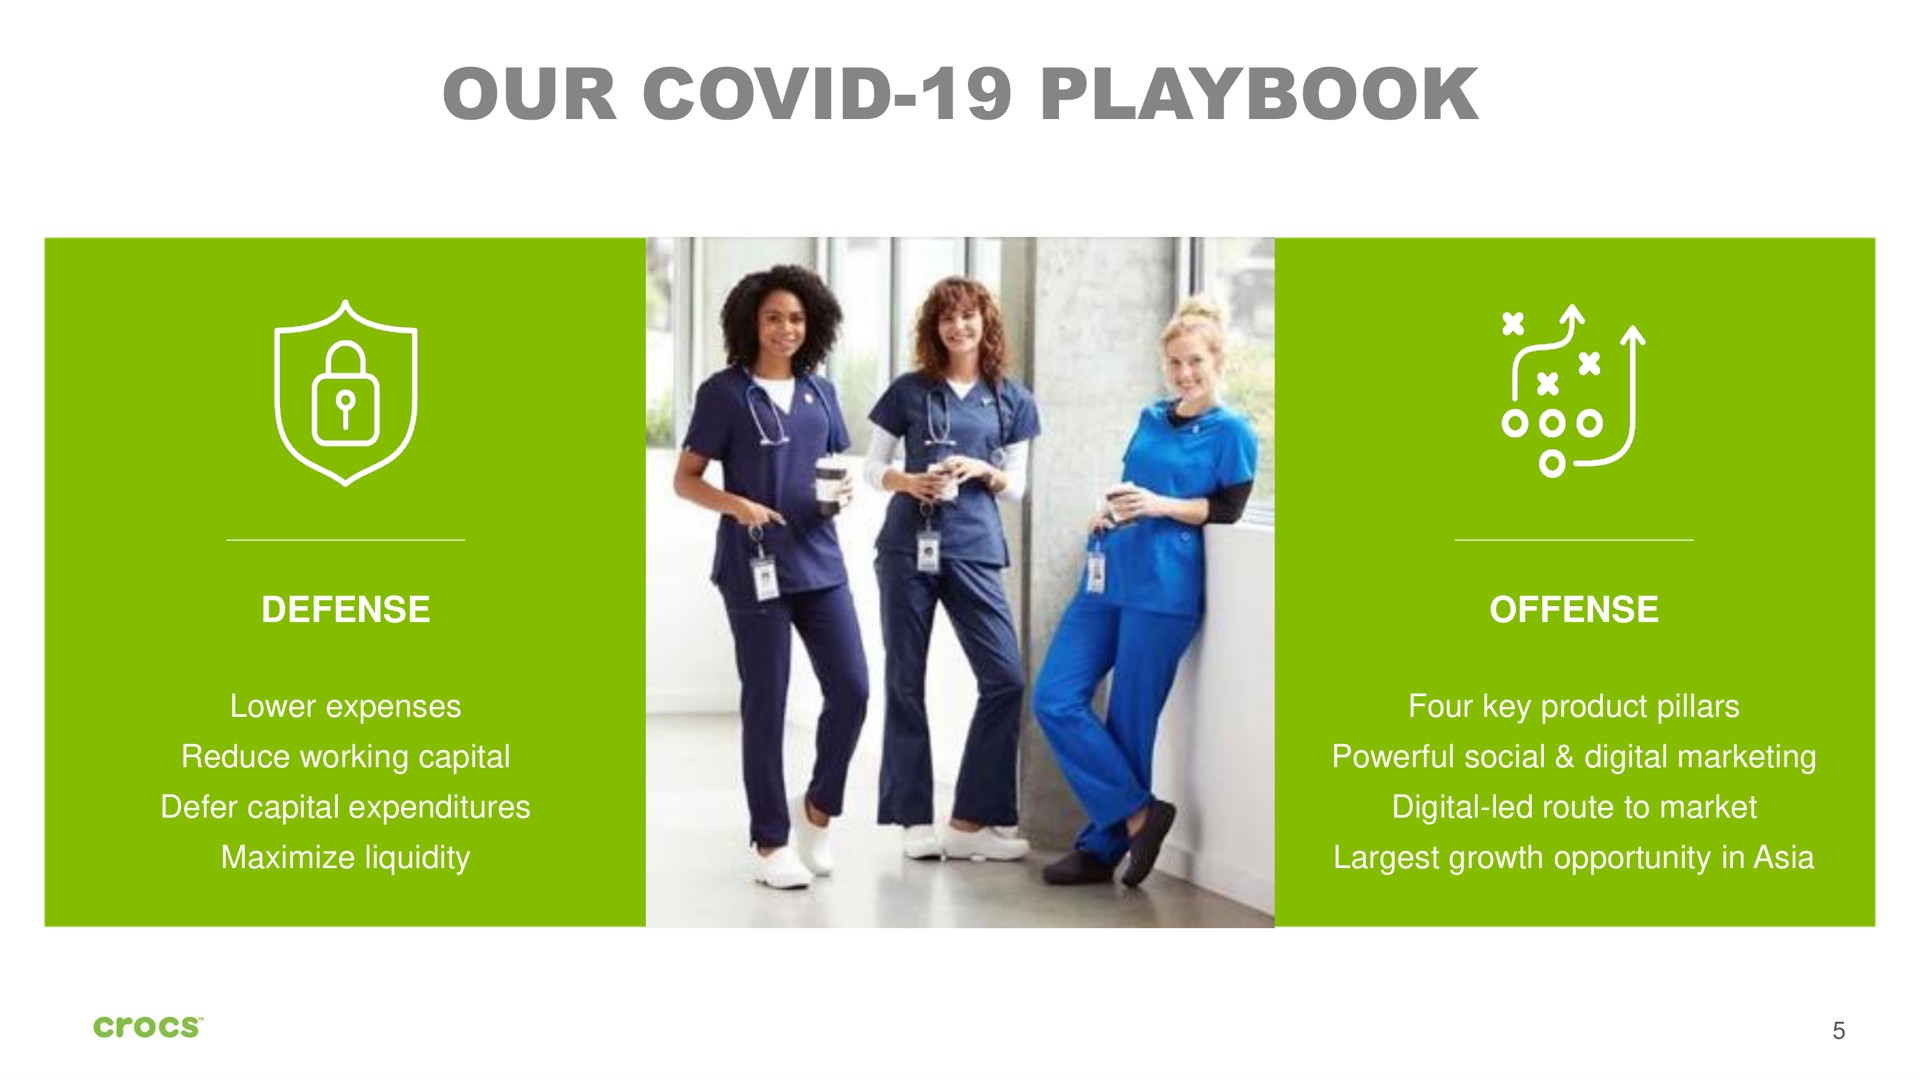 our covid playbook defense powerful social digital marketing defer capital expenditures offense | Crocs